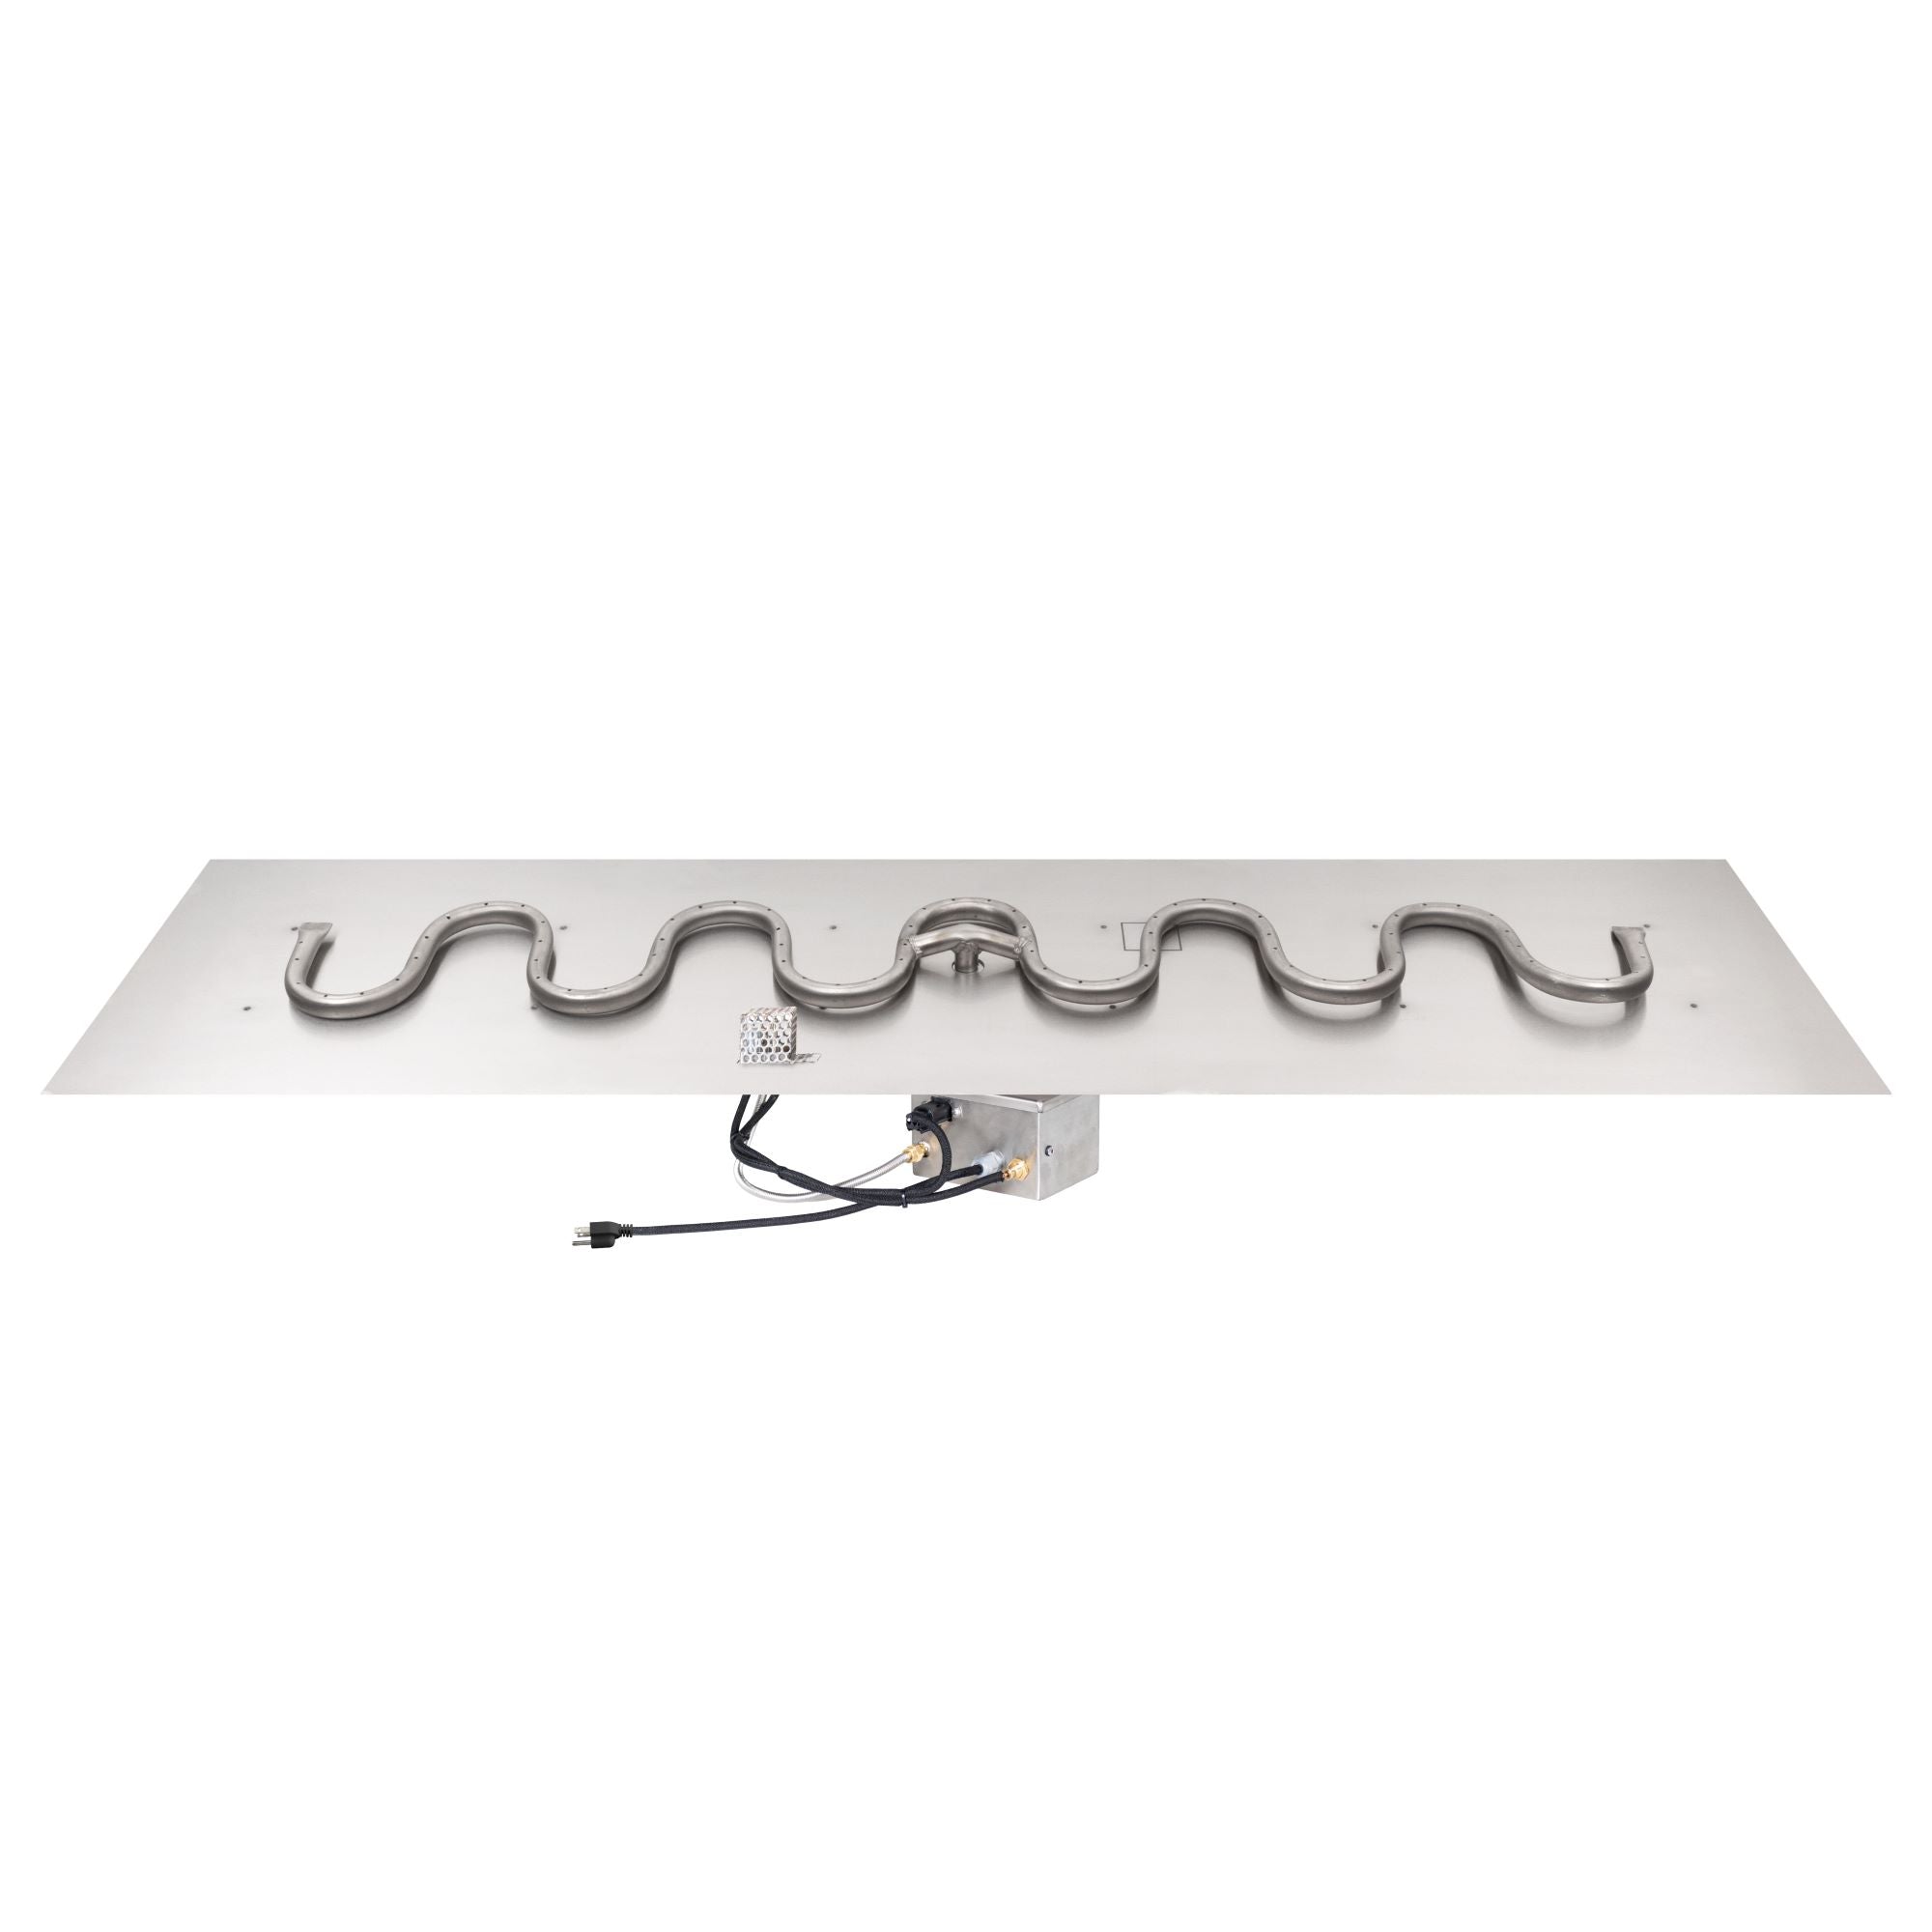 The Outdoor Plus Rectangular Flat Pan 18" with Stainless Steel Switchback Burner